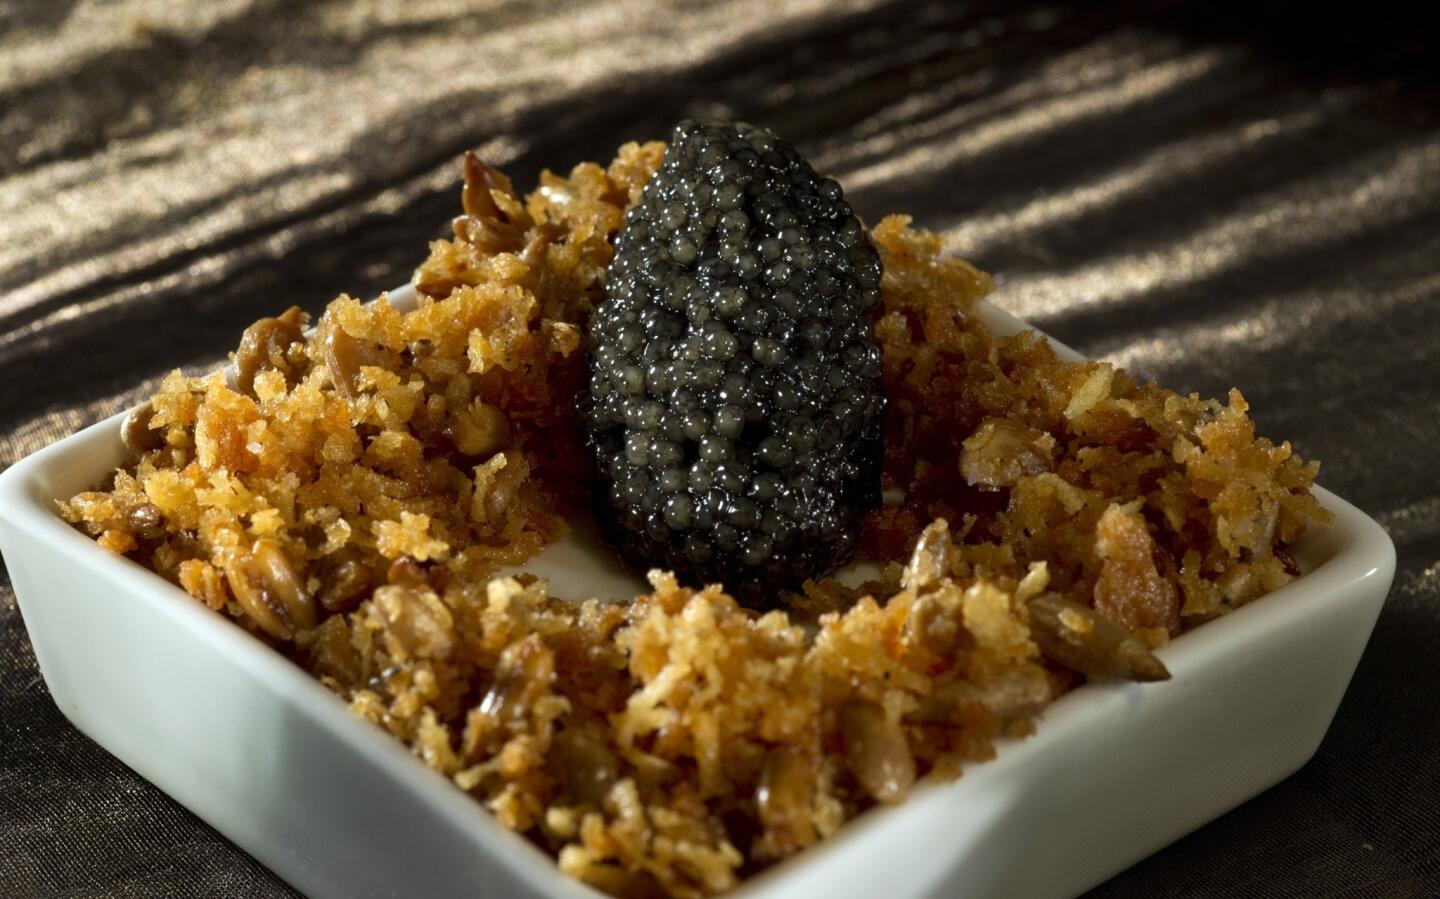 Make no mistake, caviar is a luxury ingredient, something you spring for only on the most celebratory of occasions. But when you do, you want to feature it in a dish that is up to the occasion too. Quite honestly, even without the caviar, this recipe from French Laundry chef Thomas Keller probably would have made the list. With it? It's a shoo-in. Recipe: Sunchoke and leek panna cotta